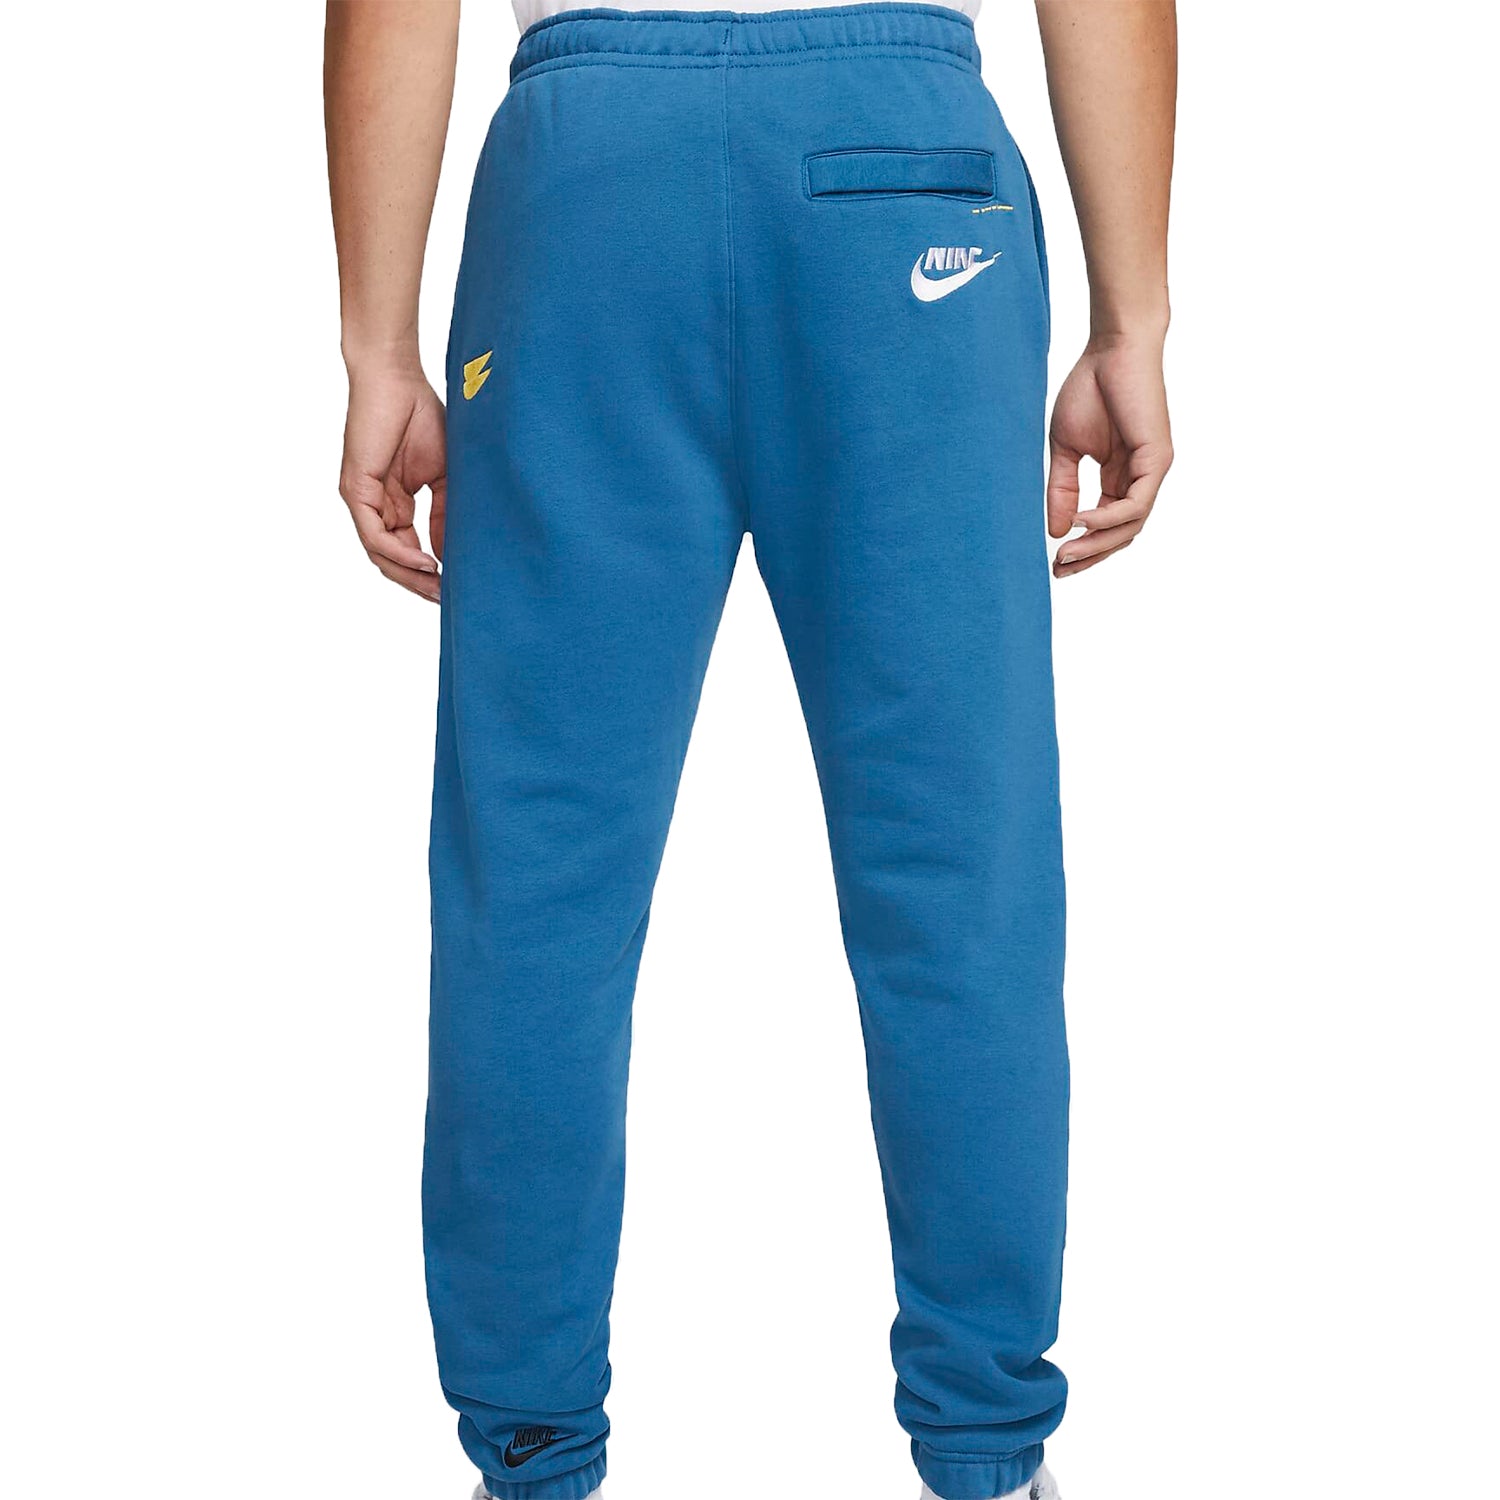 Rp700.000 - Rp1.500.000 Loose Trousers. Nike ID